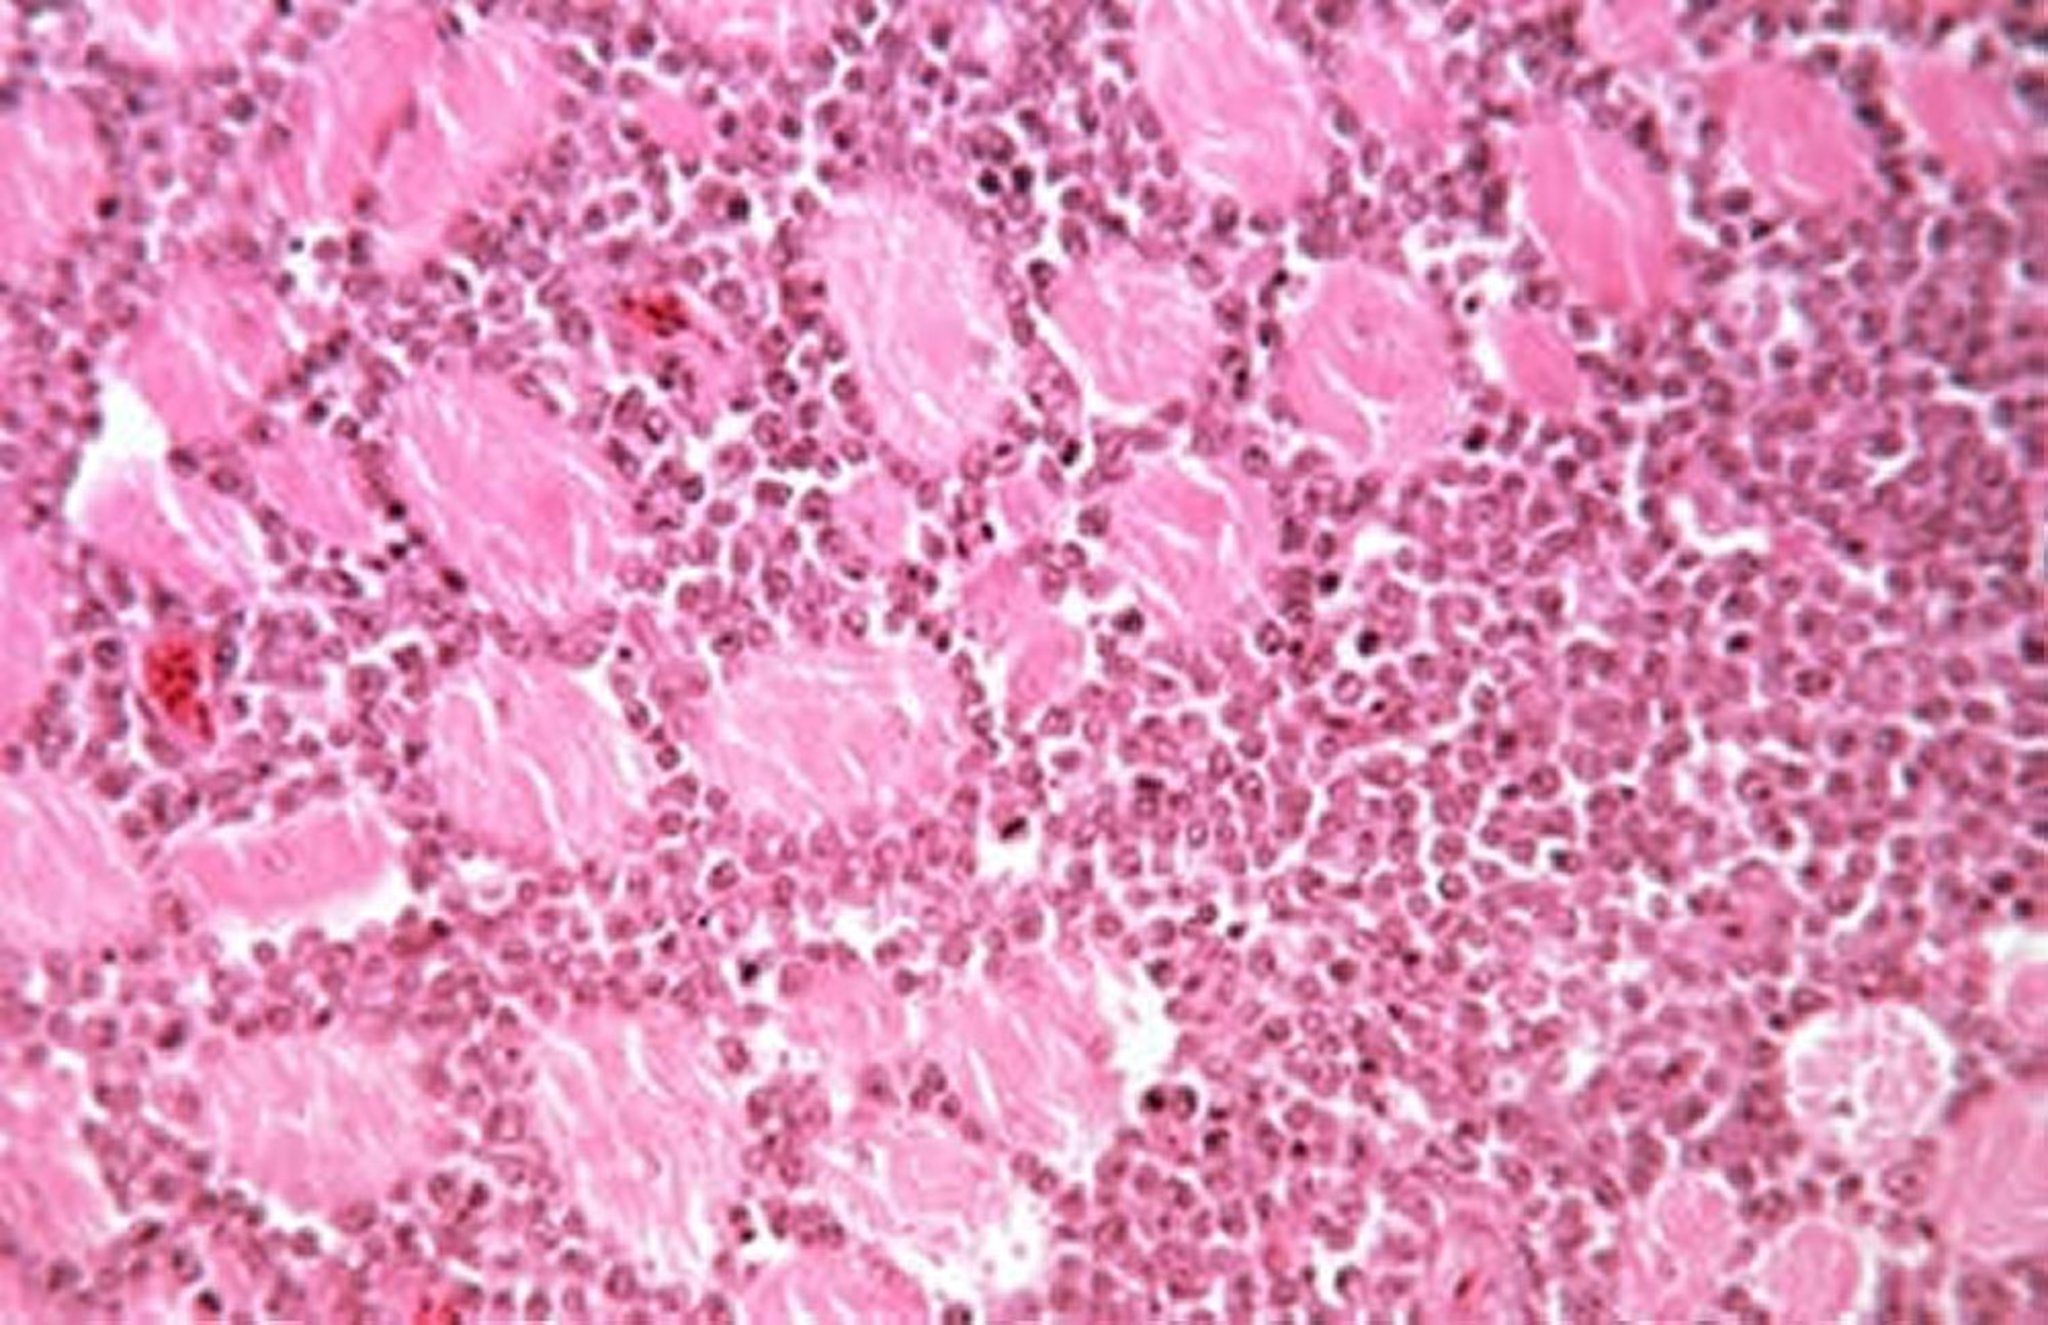 Lymphoid leukosis, lymphocytic infiltration, muscle